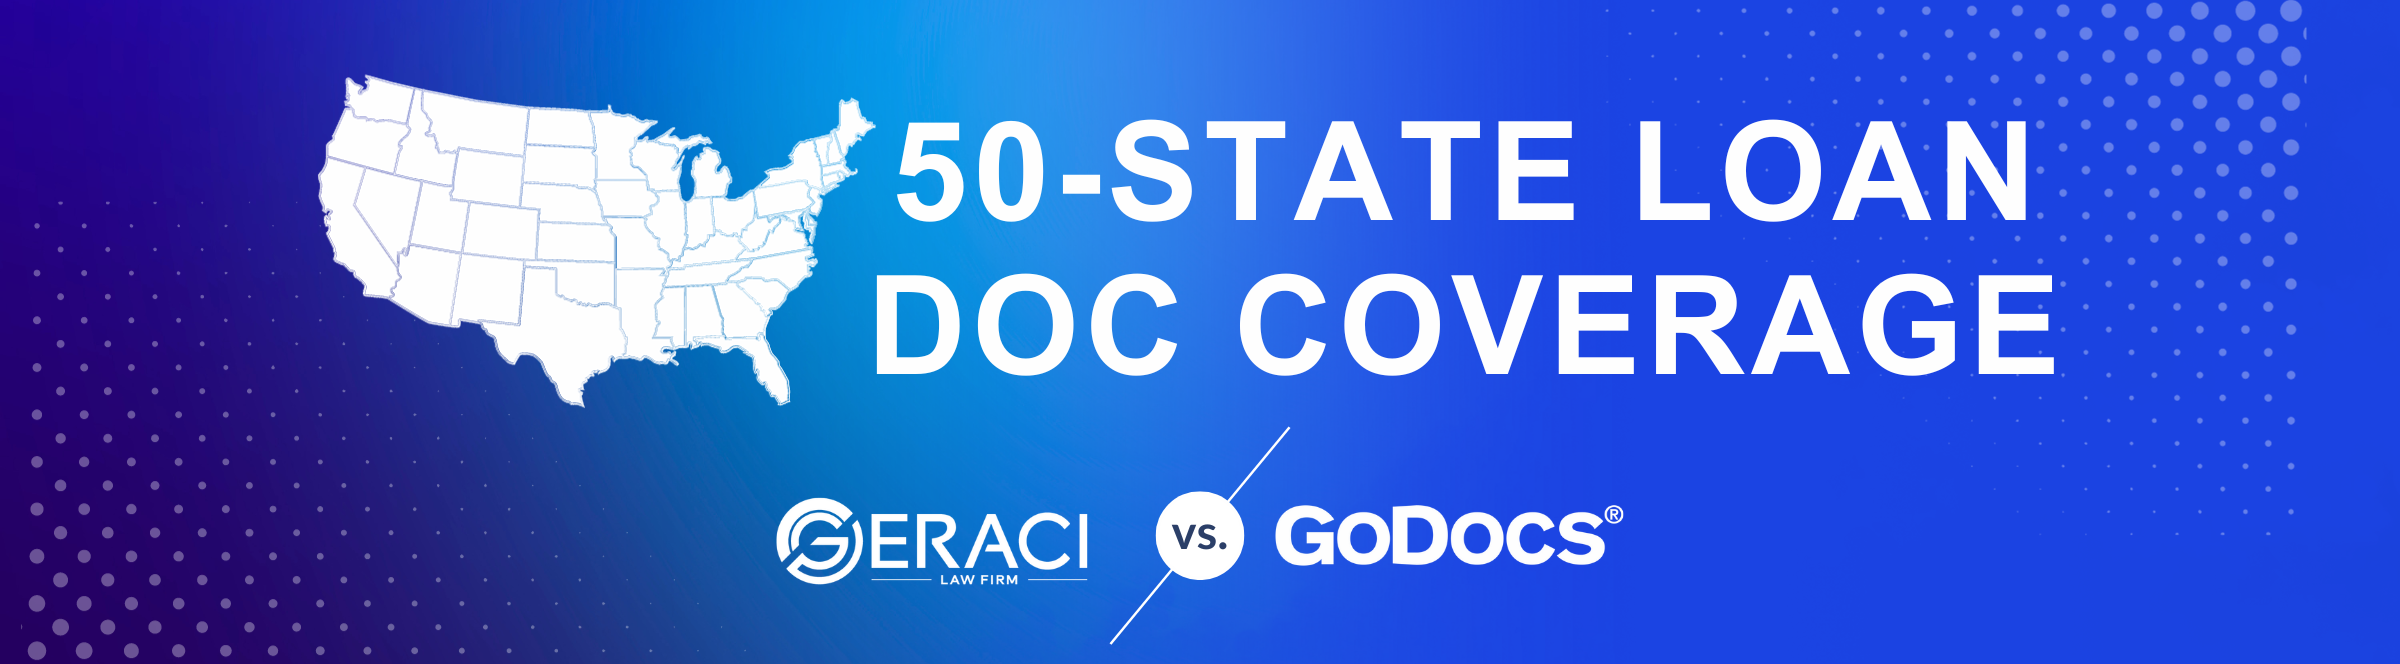 50-State Loan Doc Coverage Comparison for commercial lenders